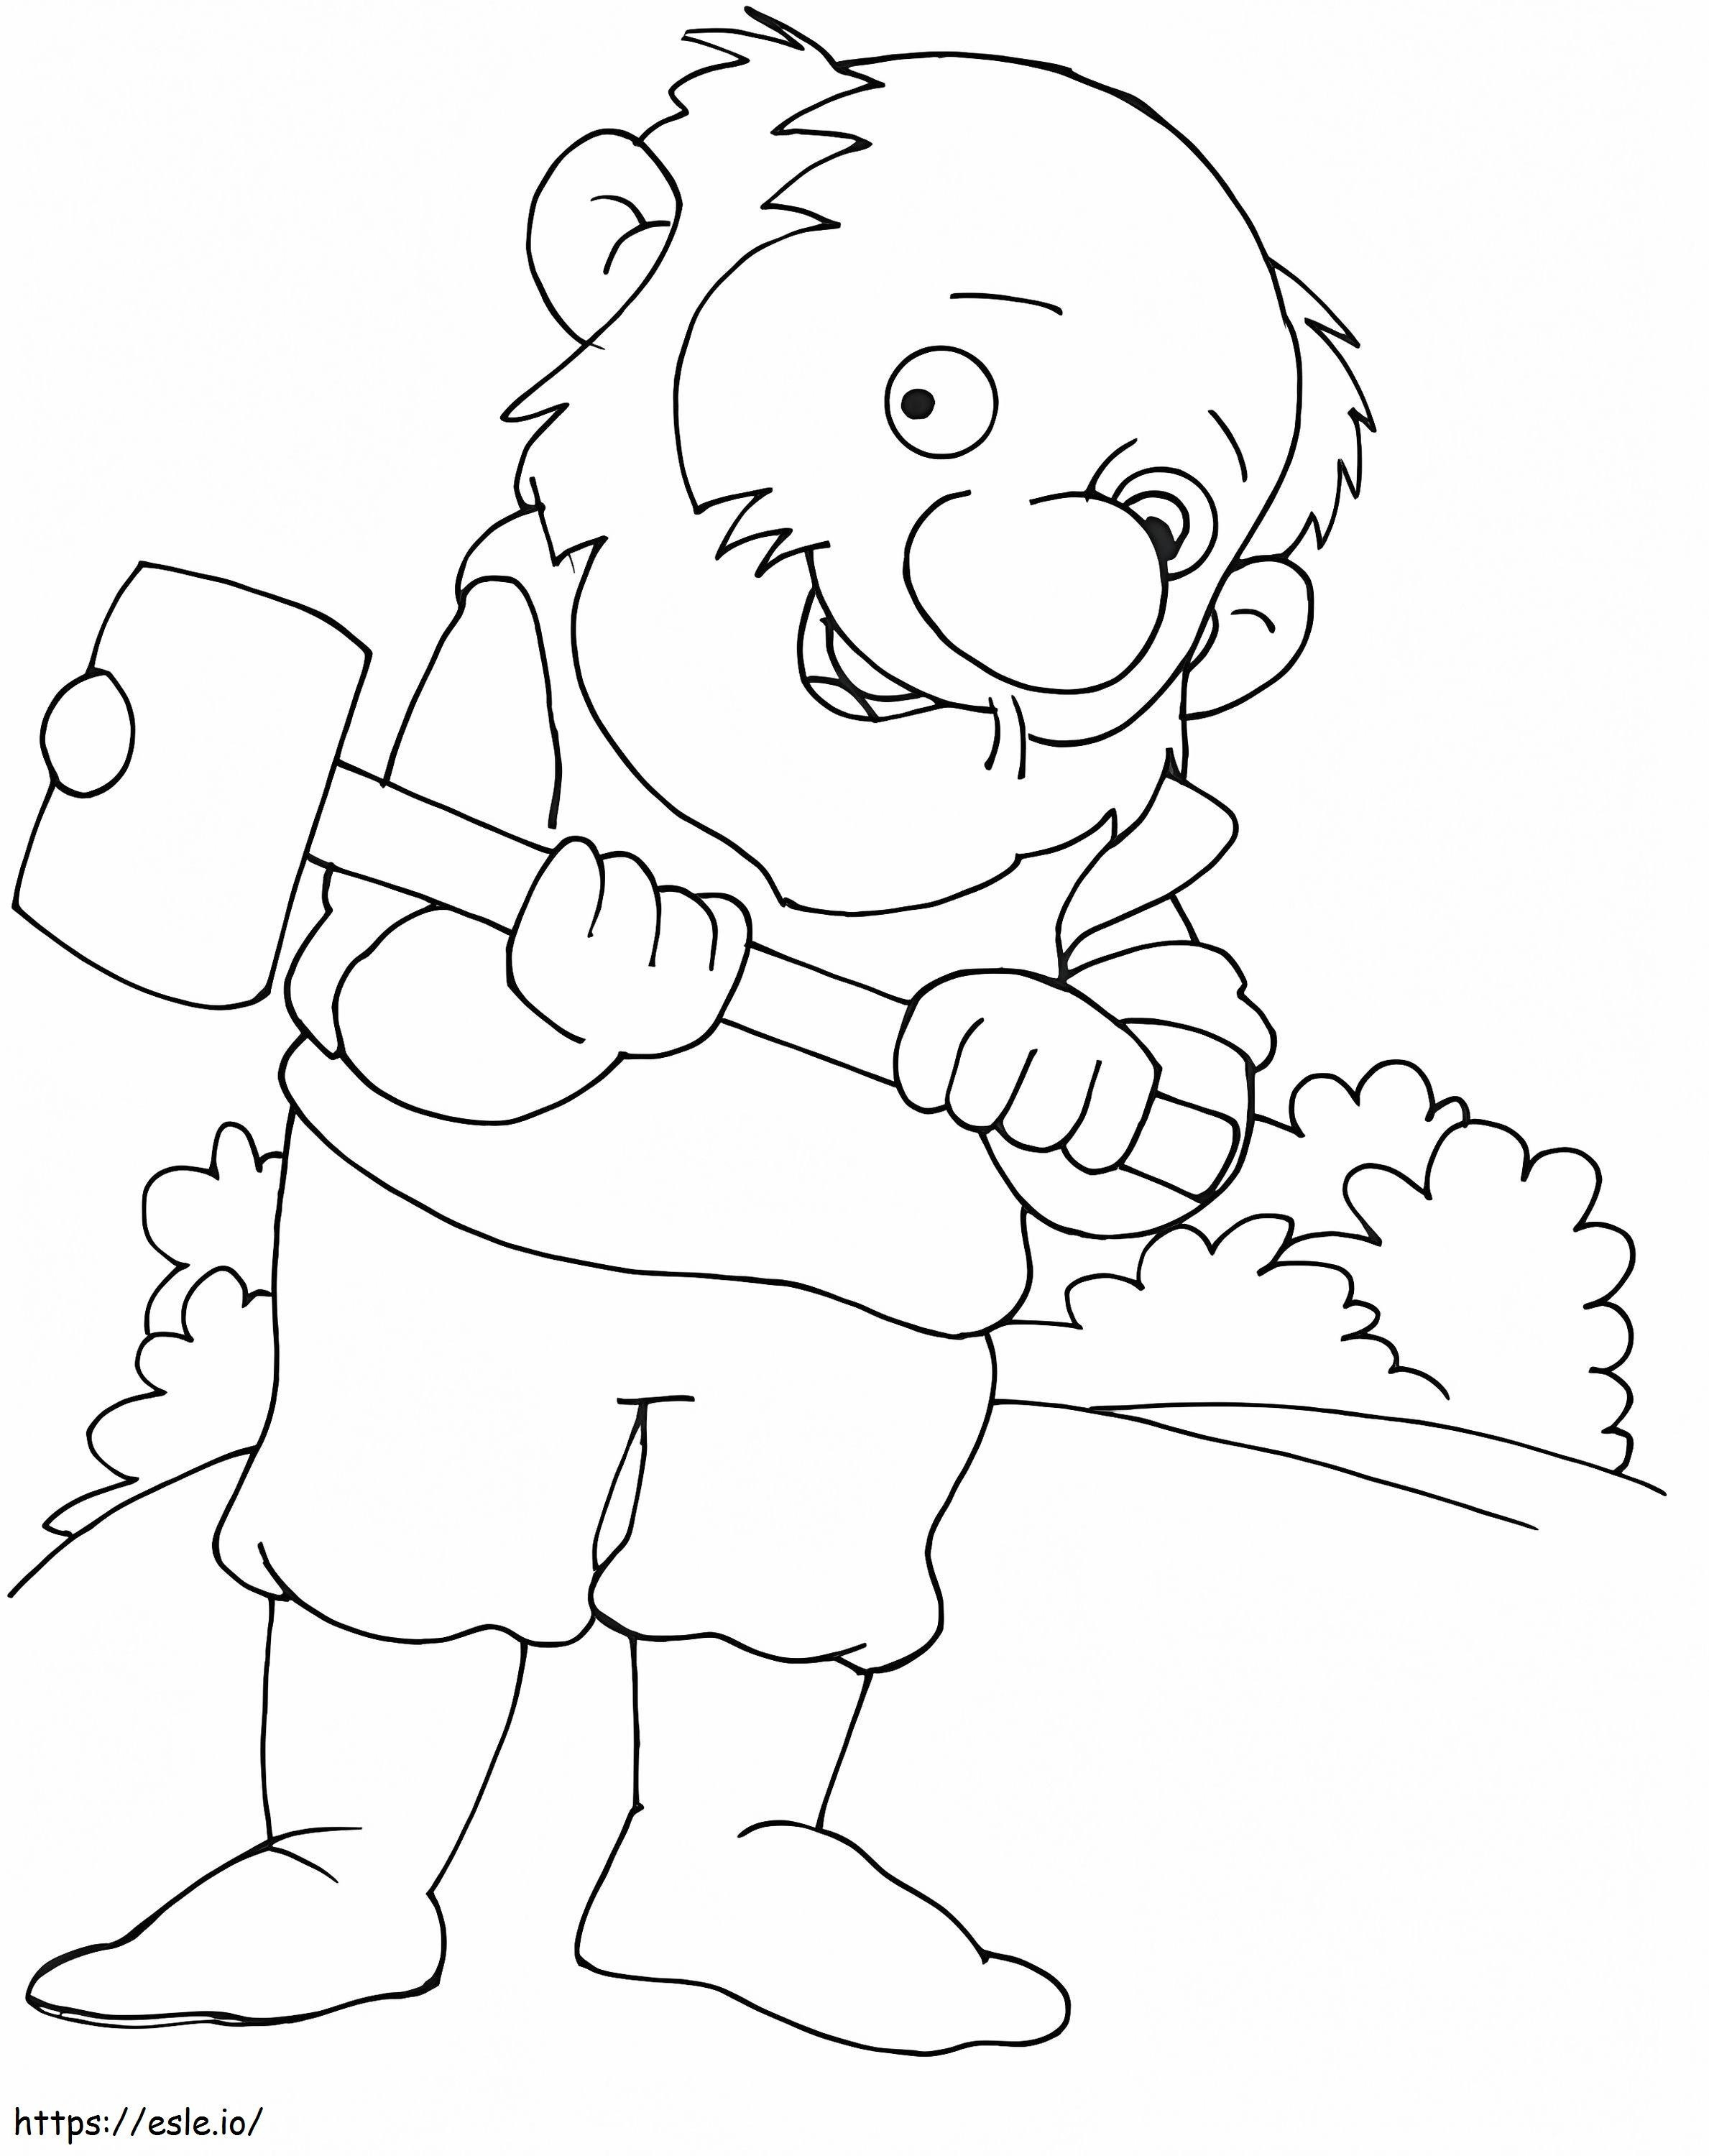 Dwarf With Hammer coloring page